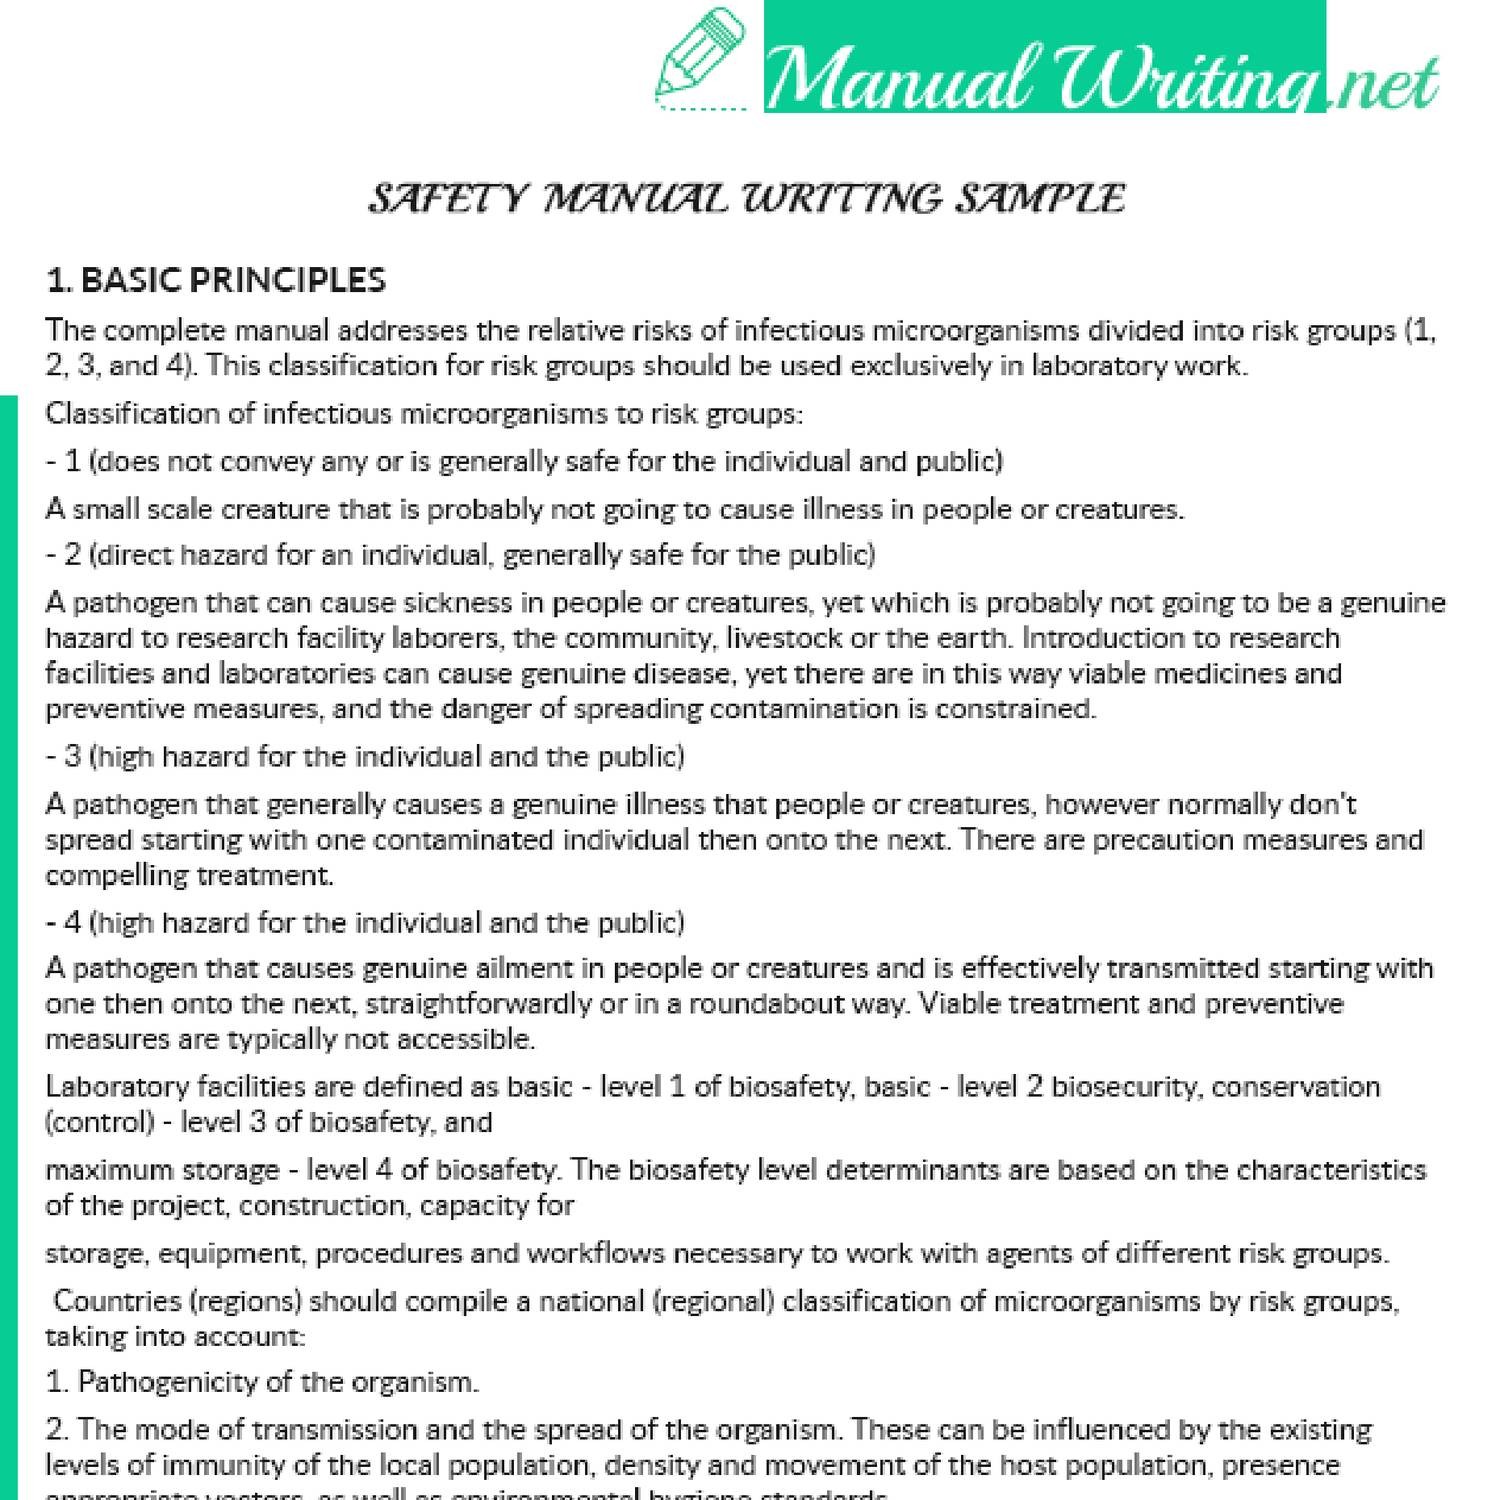 Safety Manual Writing Sample.pdf | DocDroid